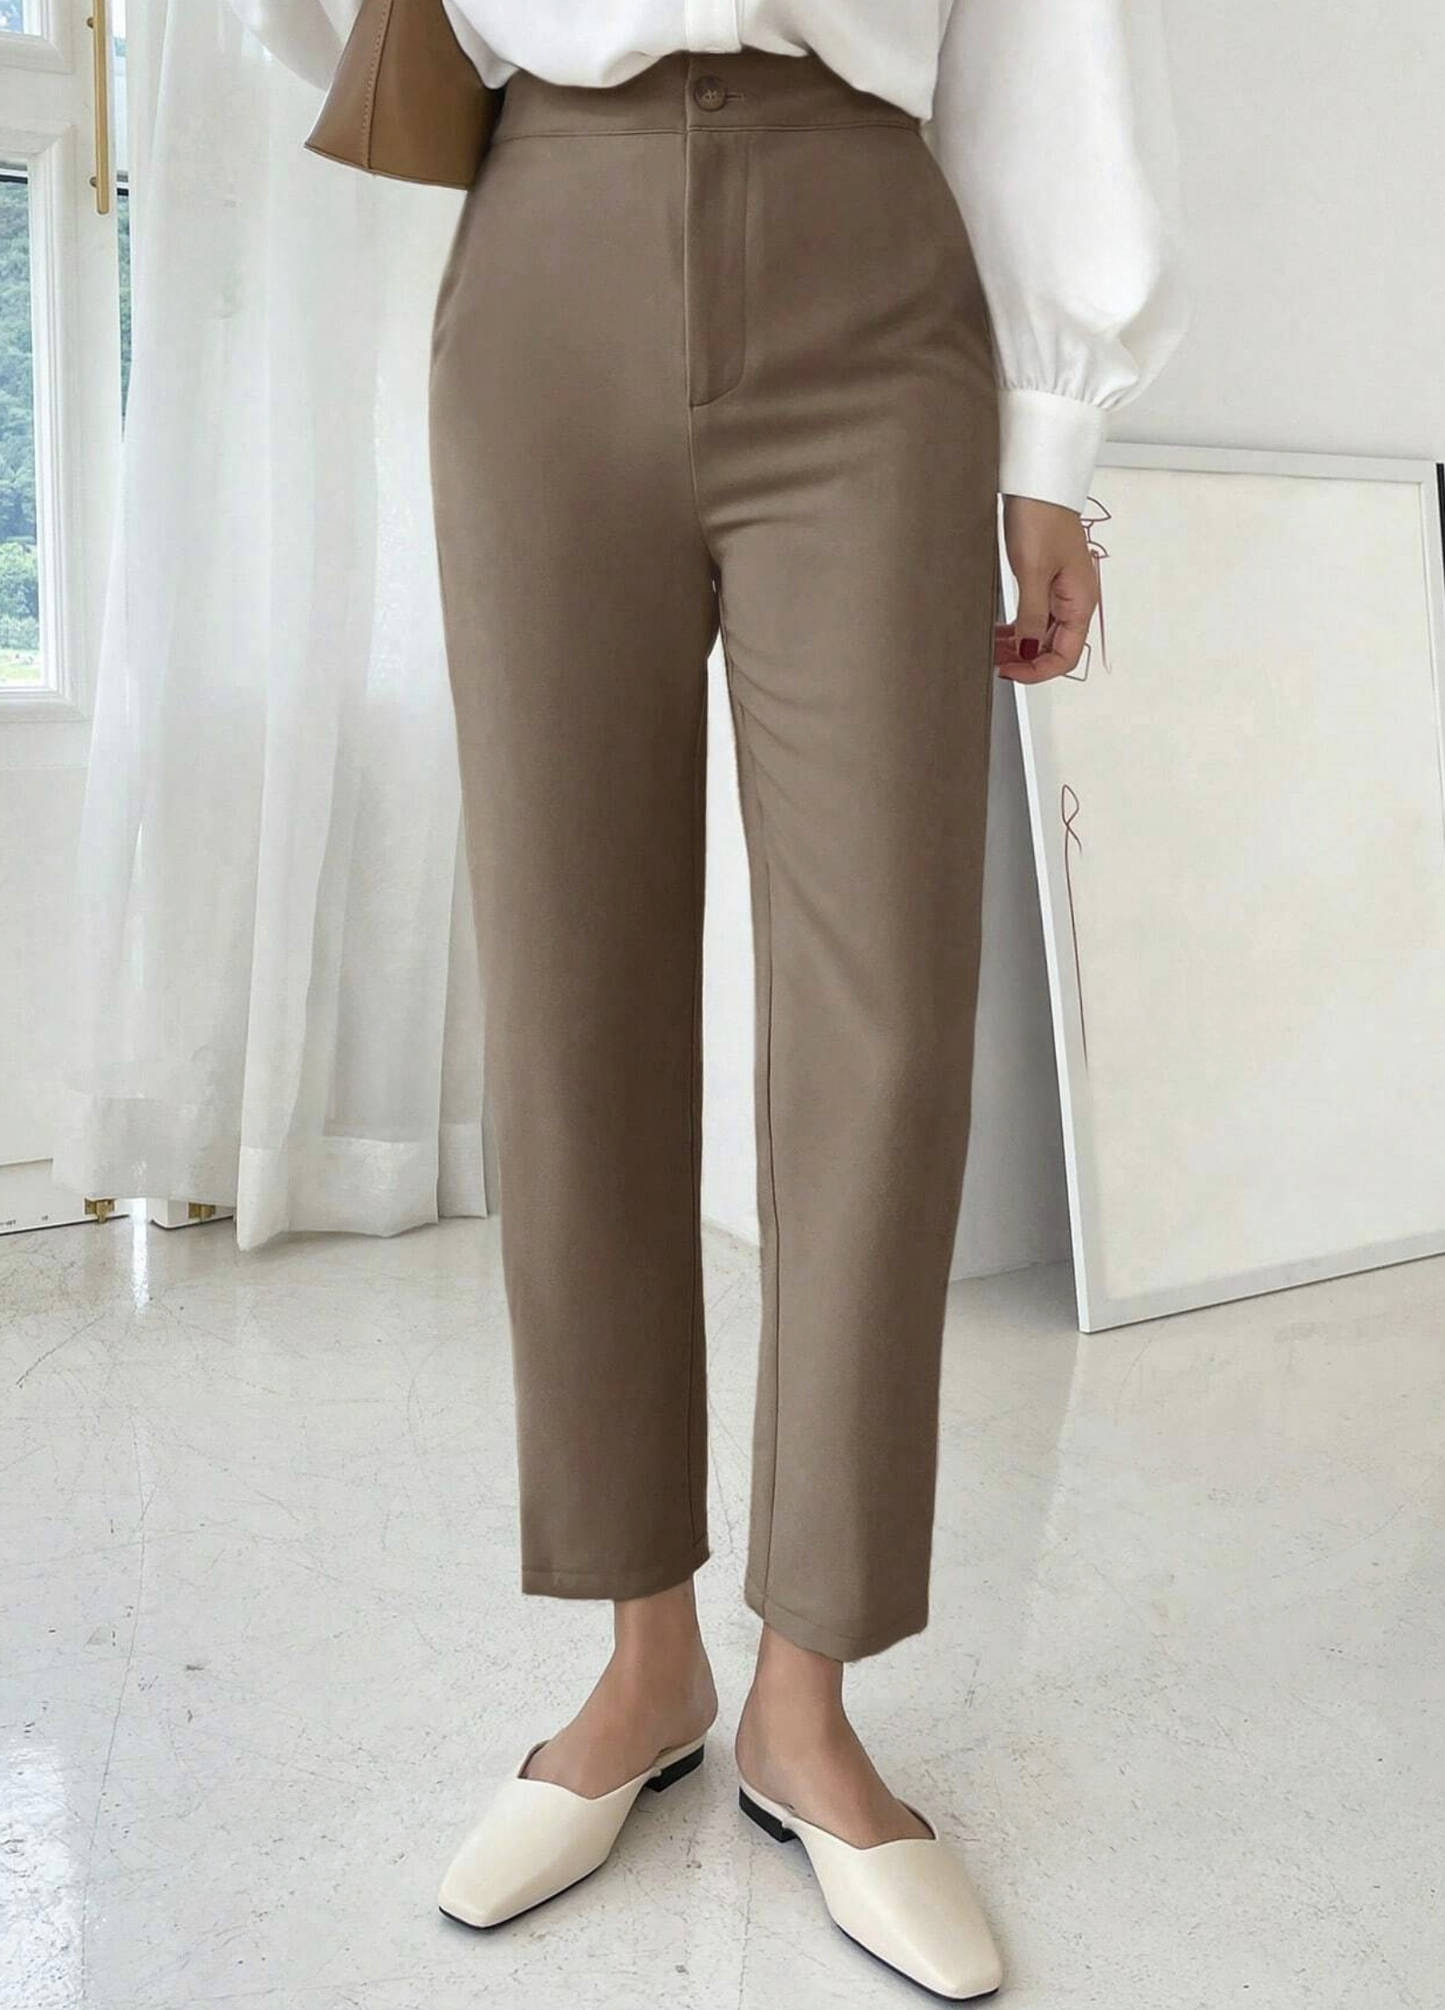 Daily Pants♥ Simple Straight Pants 5 Colors